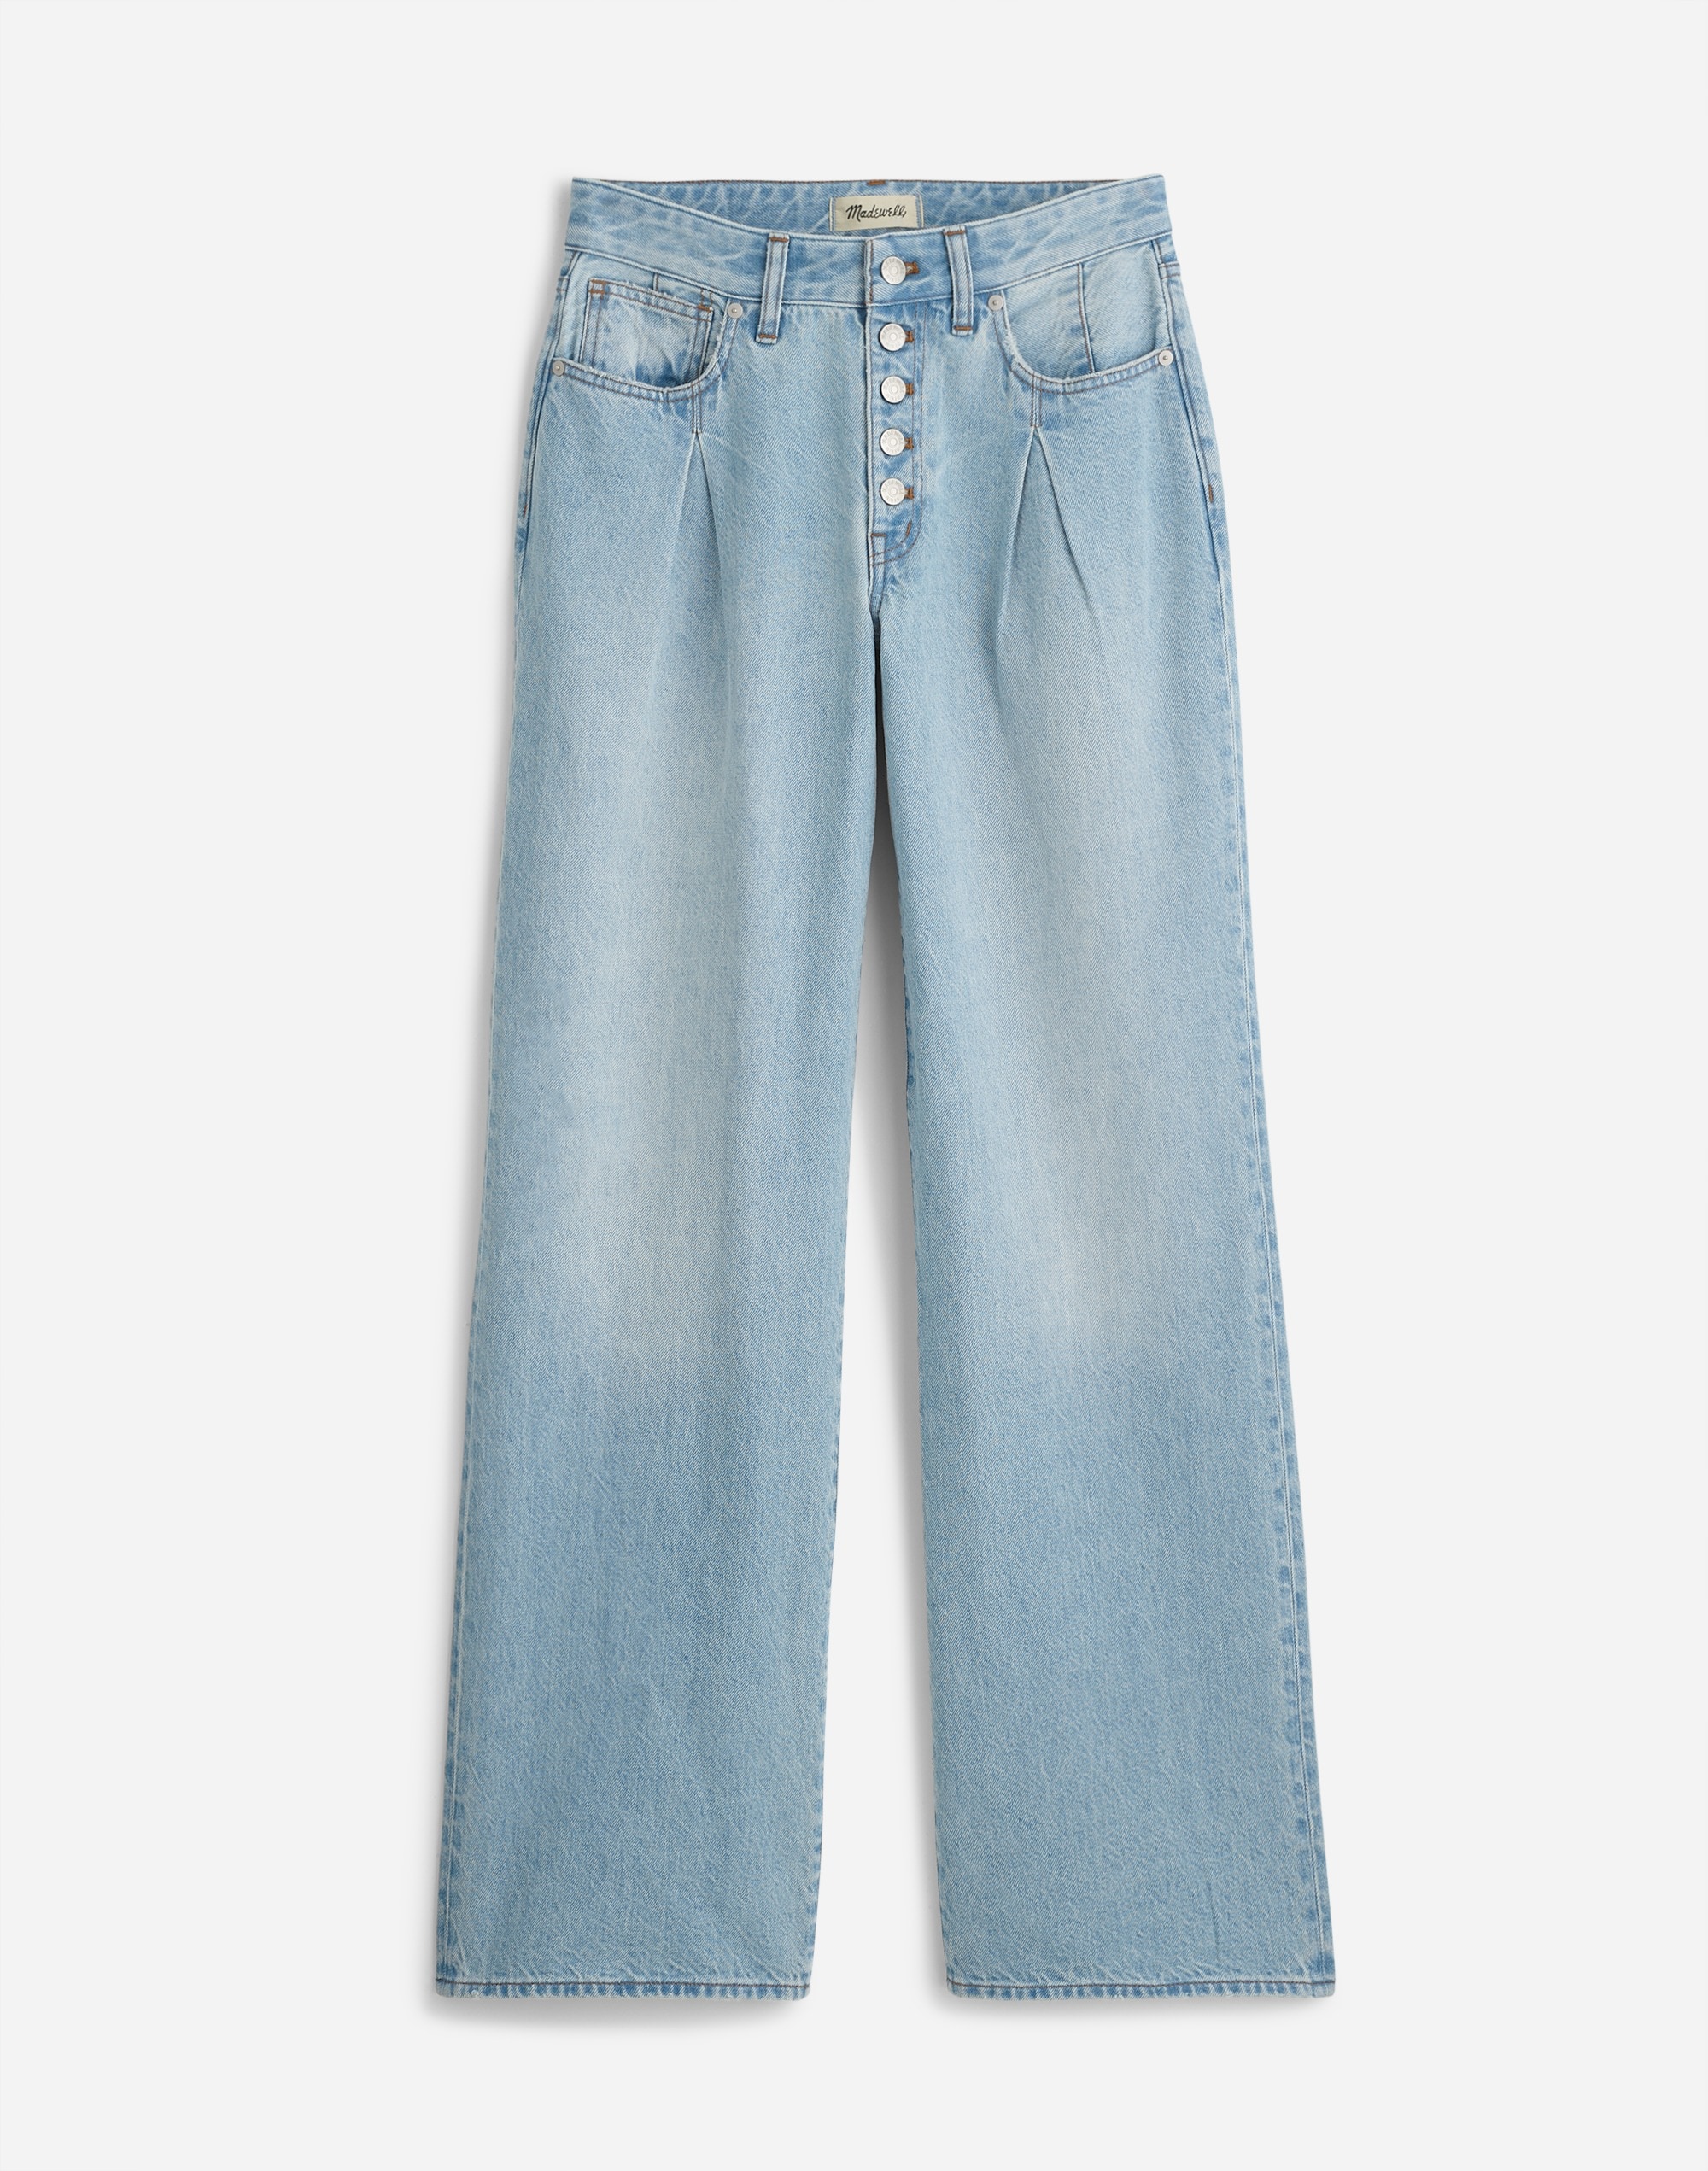 Superwide-Leg Jeans Cather Wash: Button-Front Edition